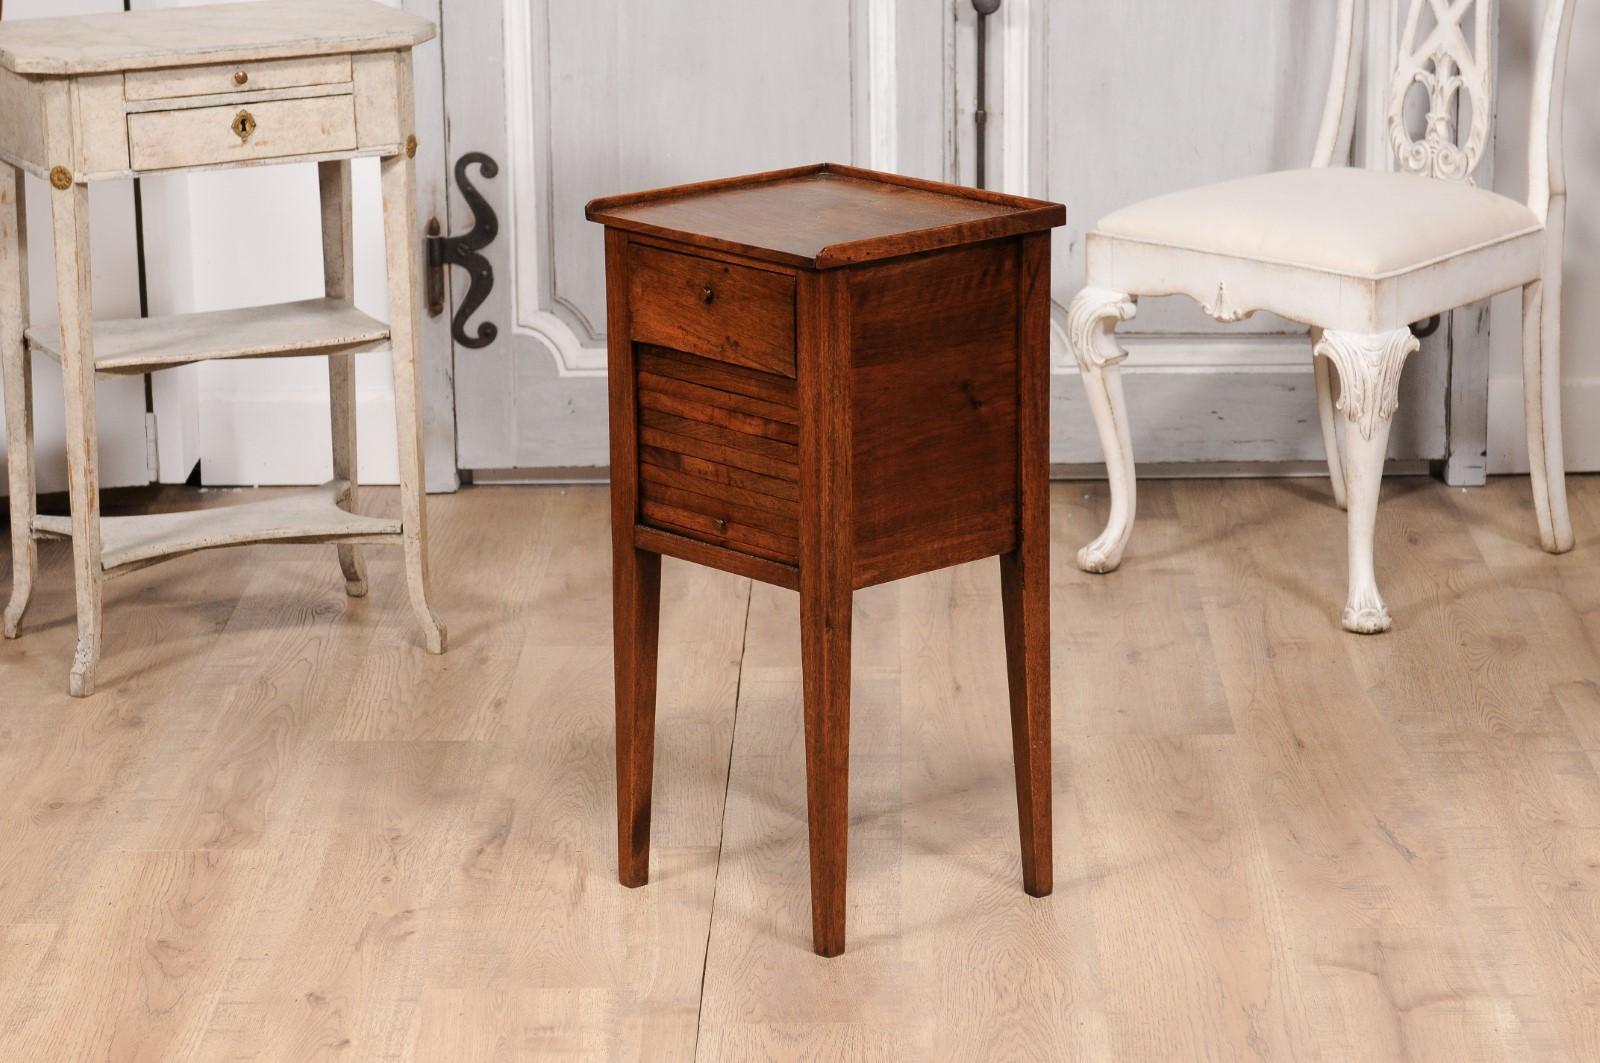 18th Century Italian Walnut Bedside Table with Single Drawer and Tambour Door For Sale 8